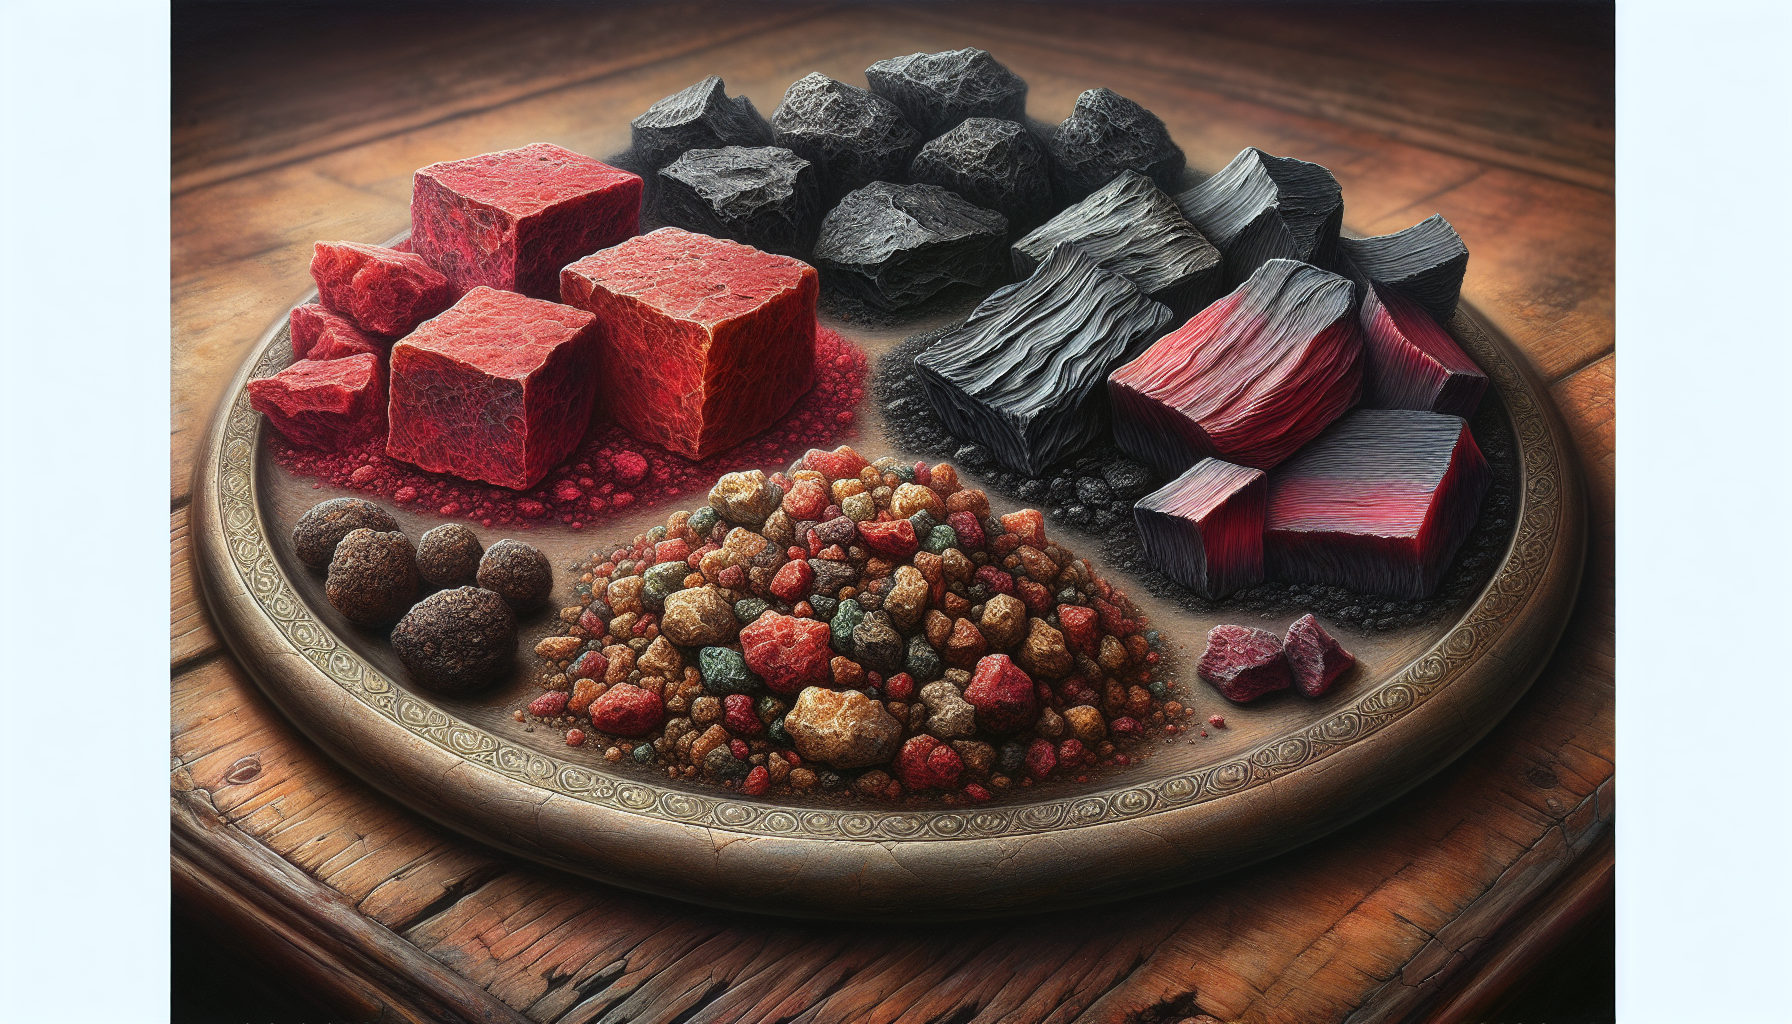 Artistic depiction of various traditional hash varieties